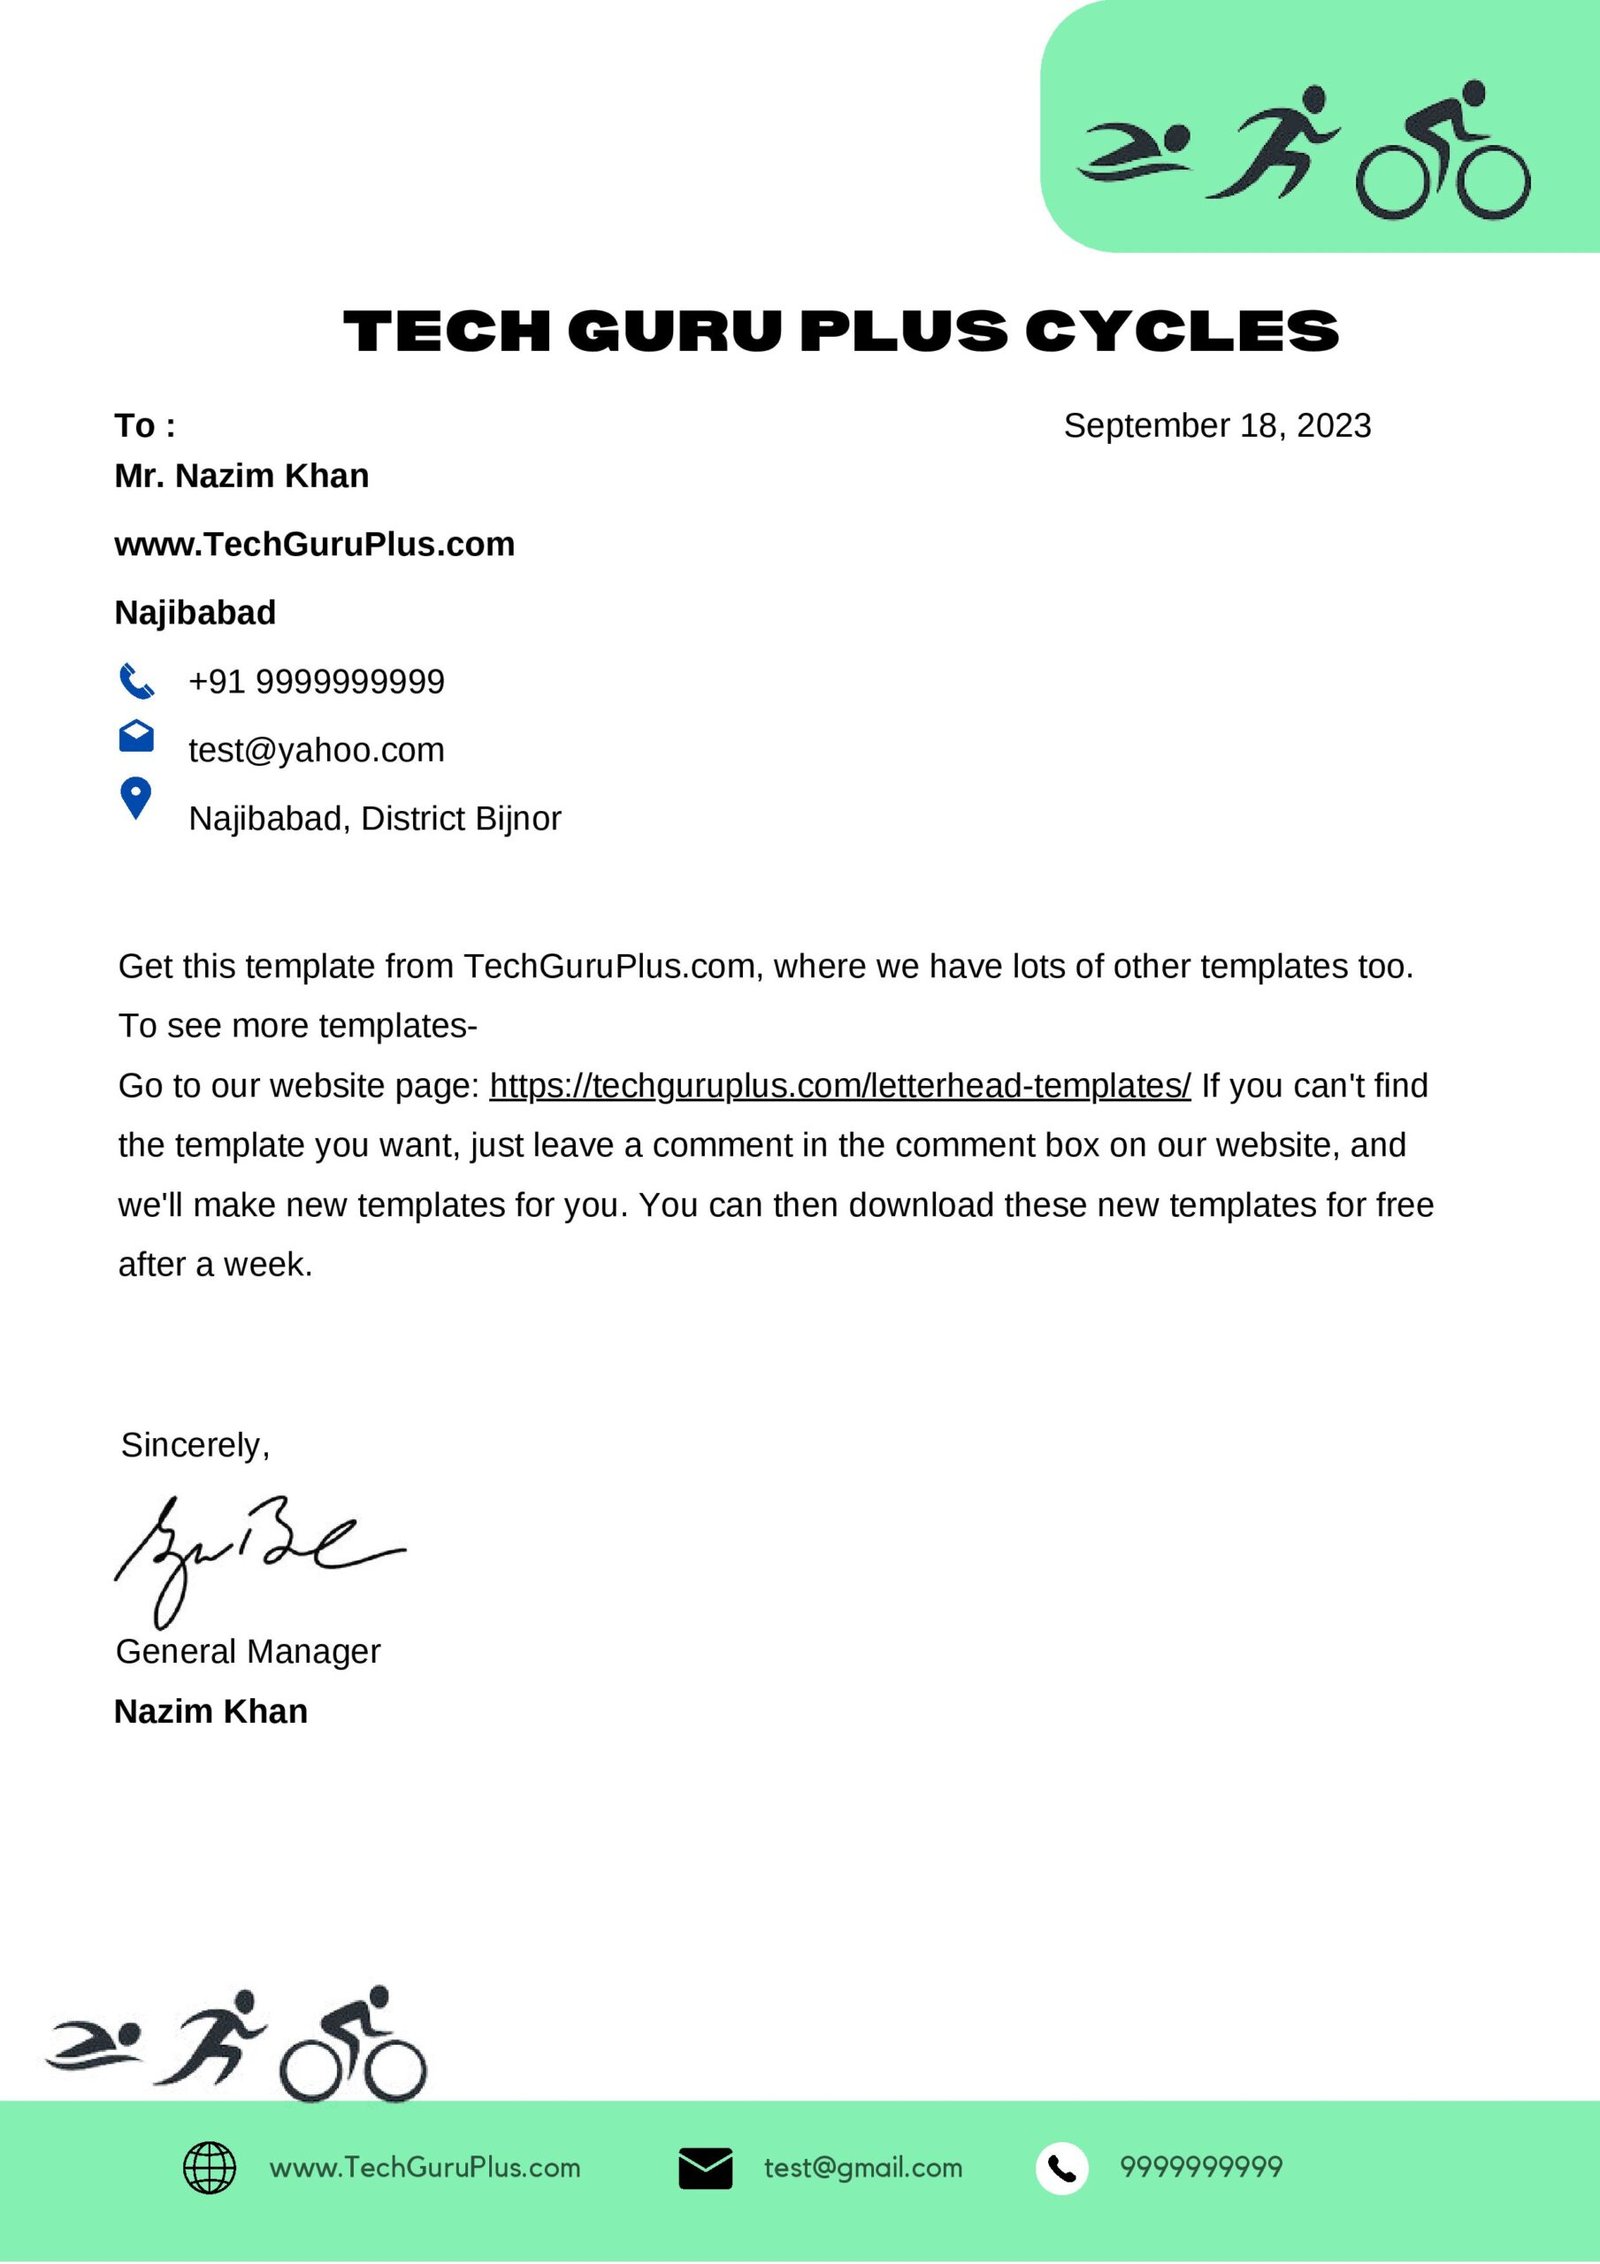 Letterhead Design In Word for Cycle Company (.docx)